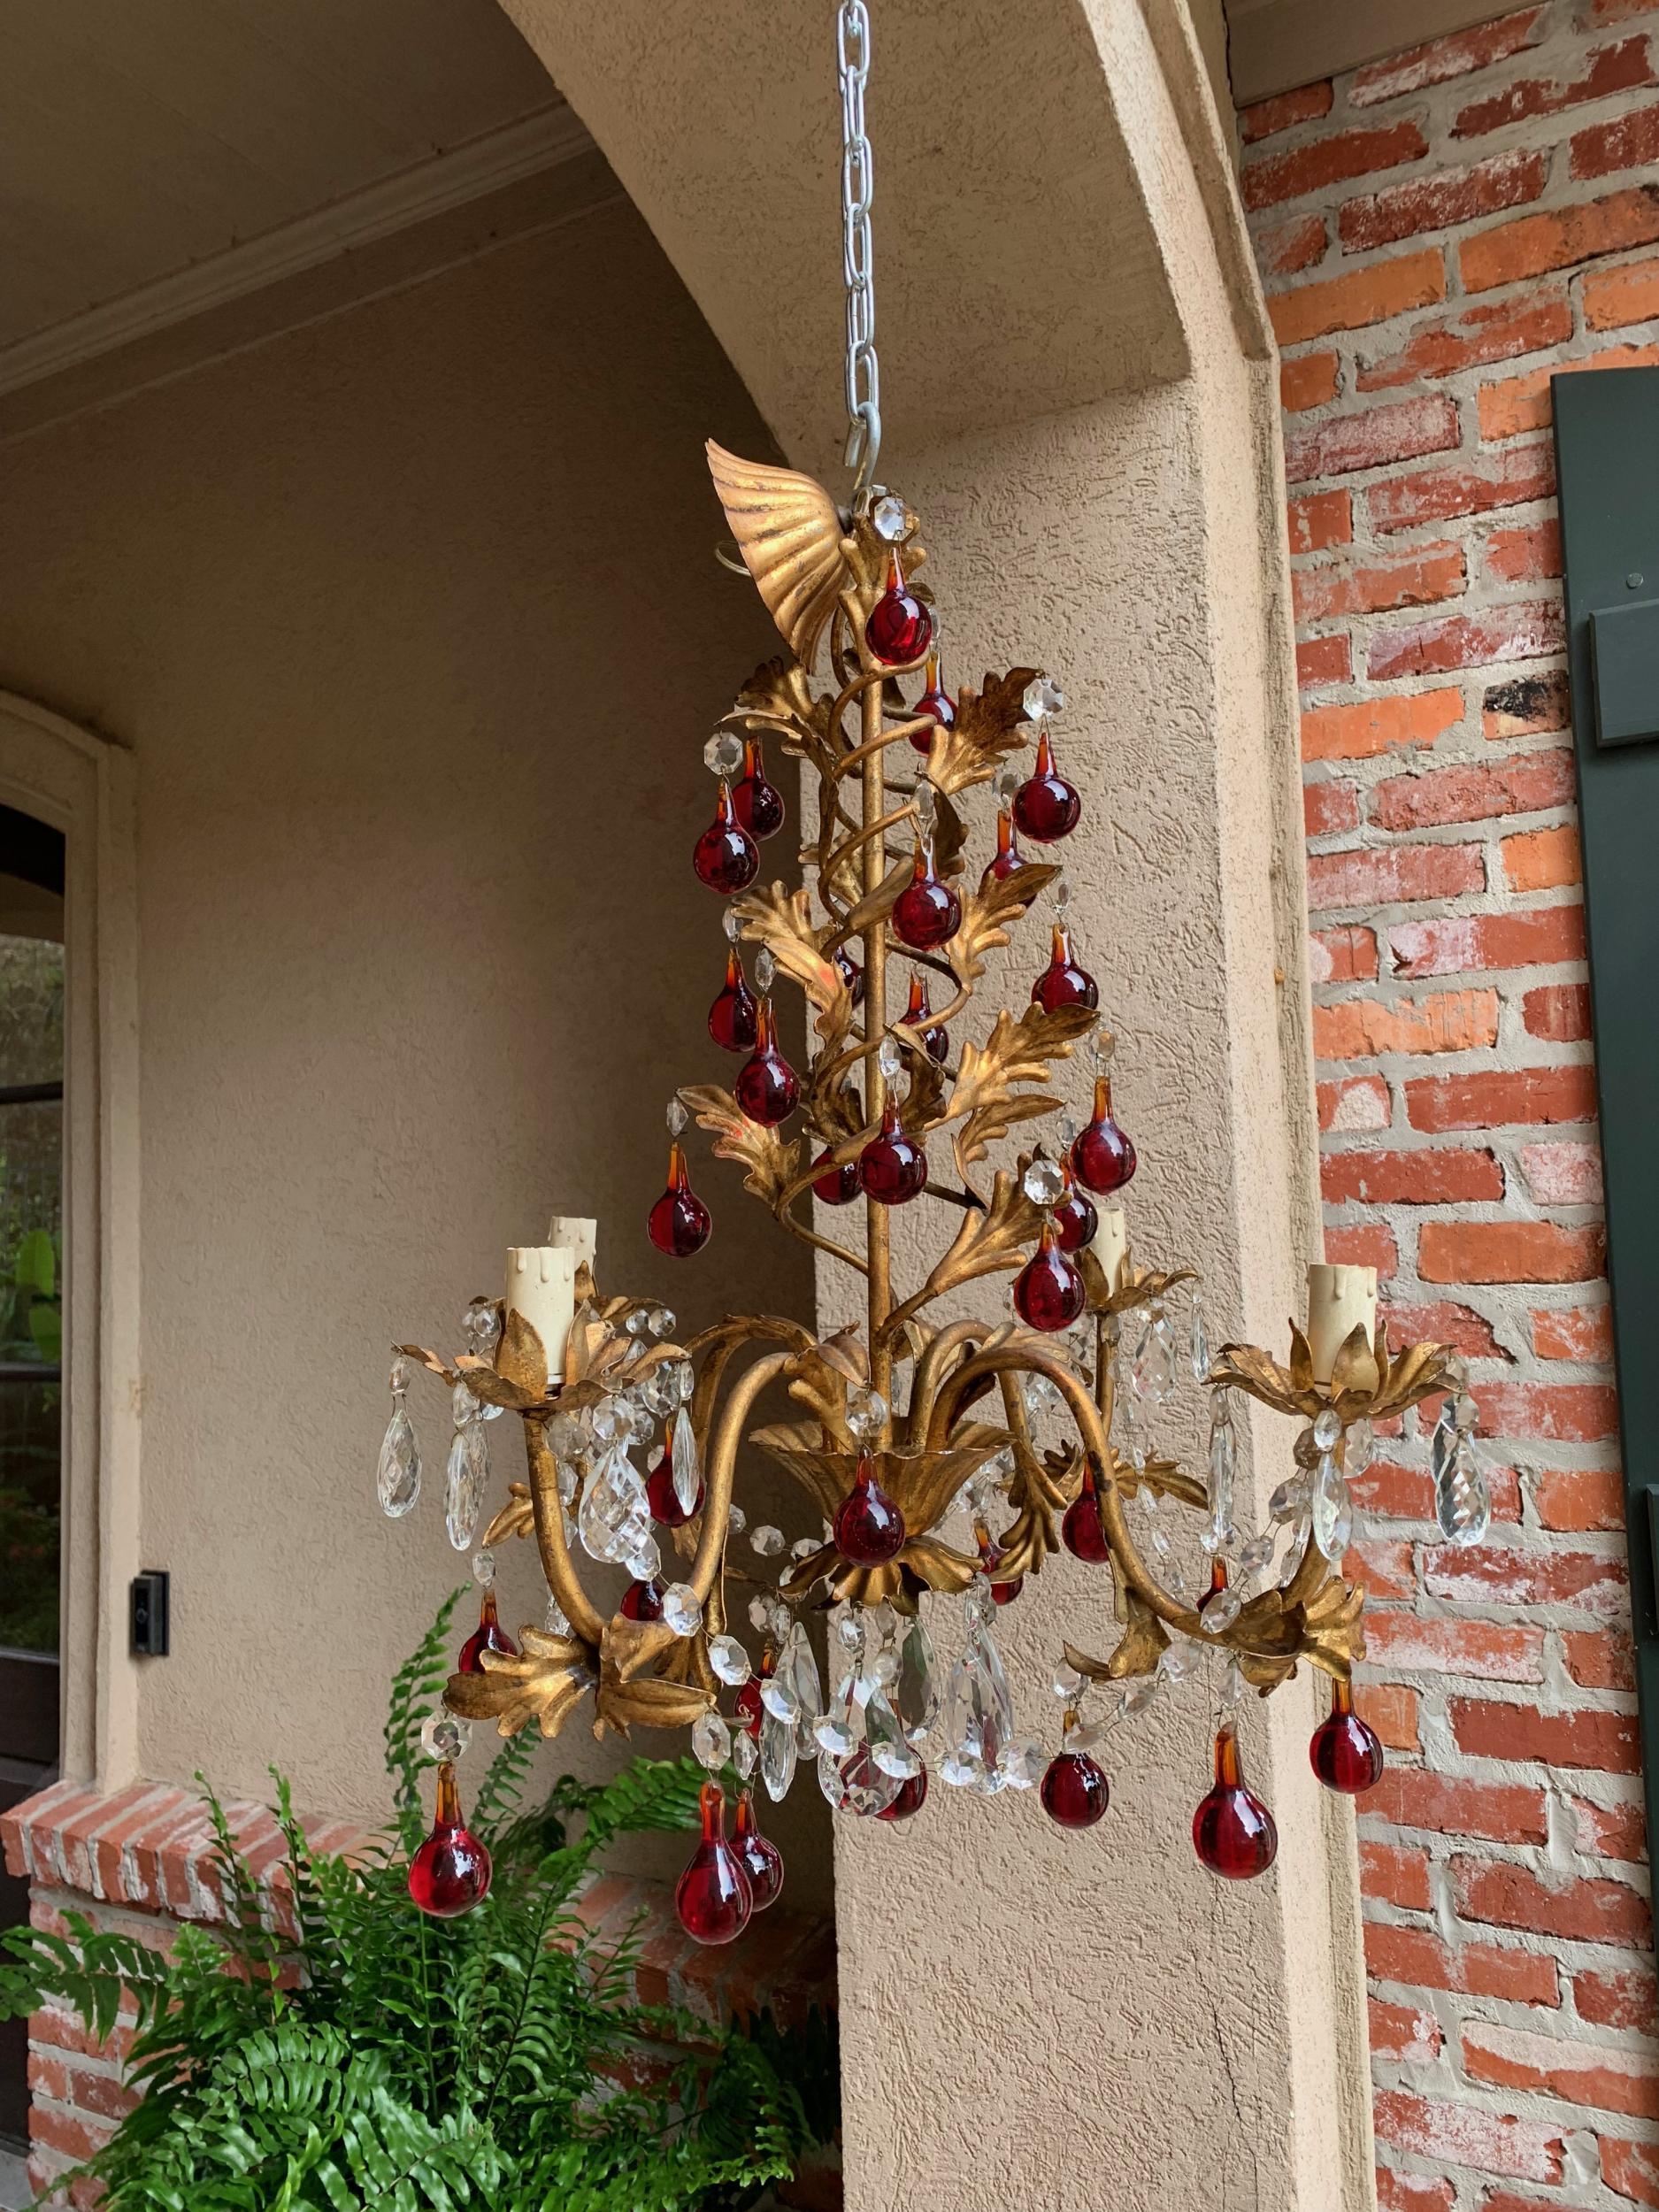 Antique French crystal prism chandelier Murano glass red drop gold gilt 4 arm

~Direct from France~
~Beautiful antique chandelier having a gilded spiral upper frame with gold gilt leaves that continue throughout, on the sweeping arms and forming